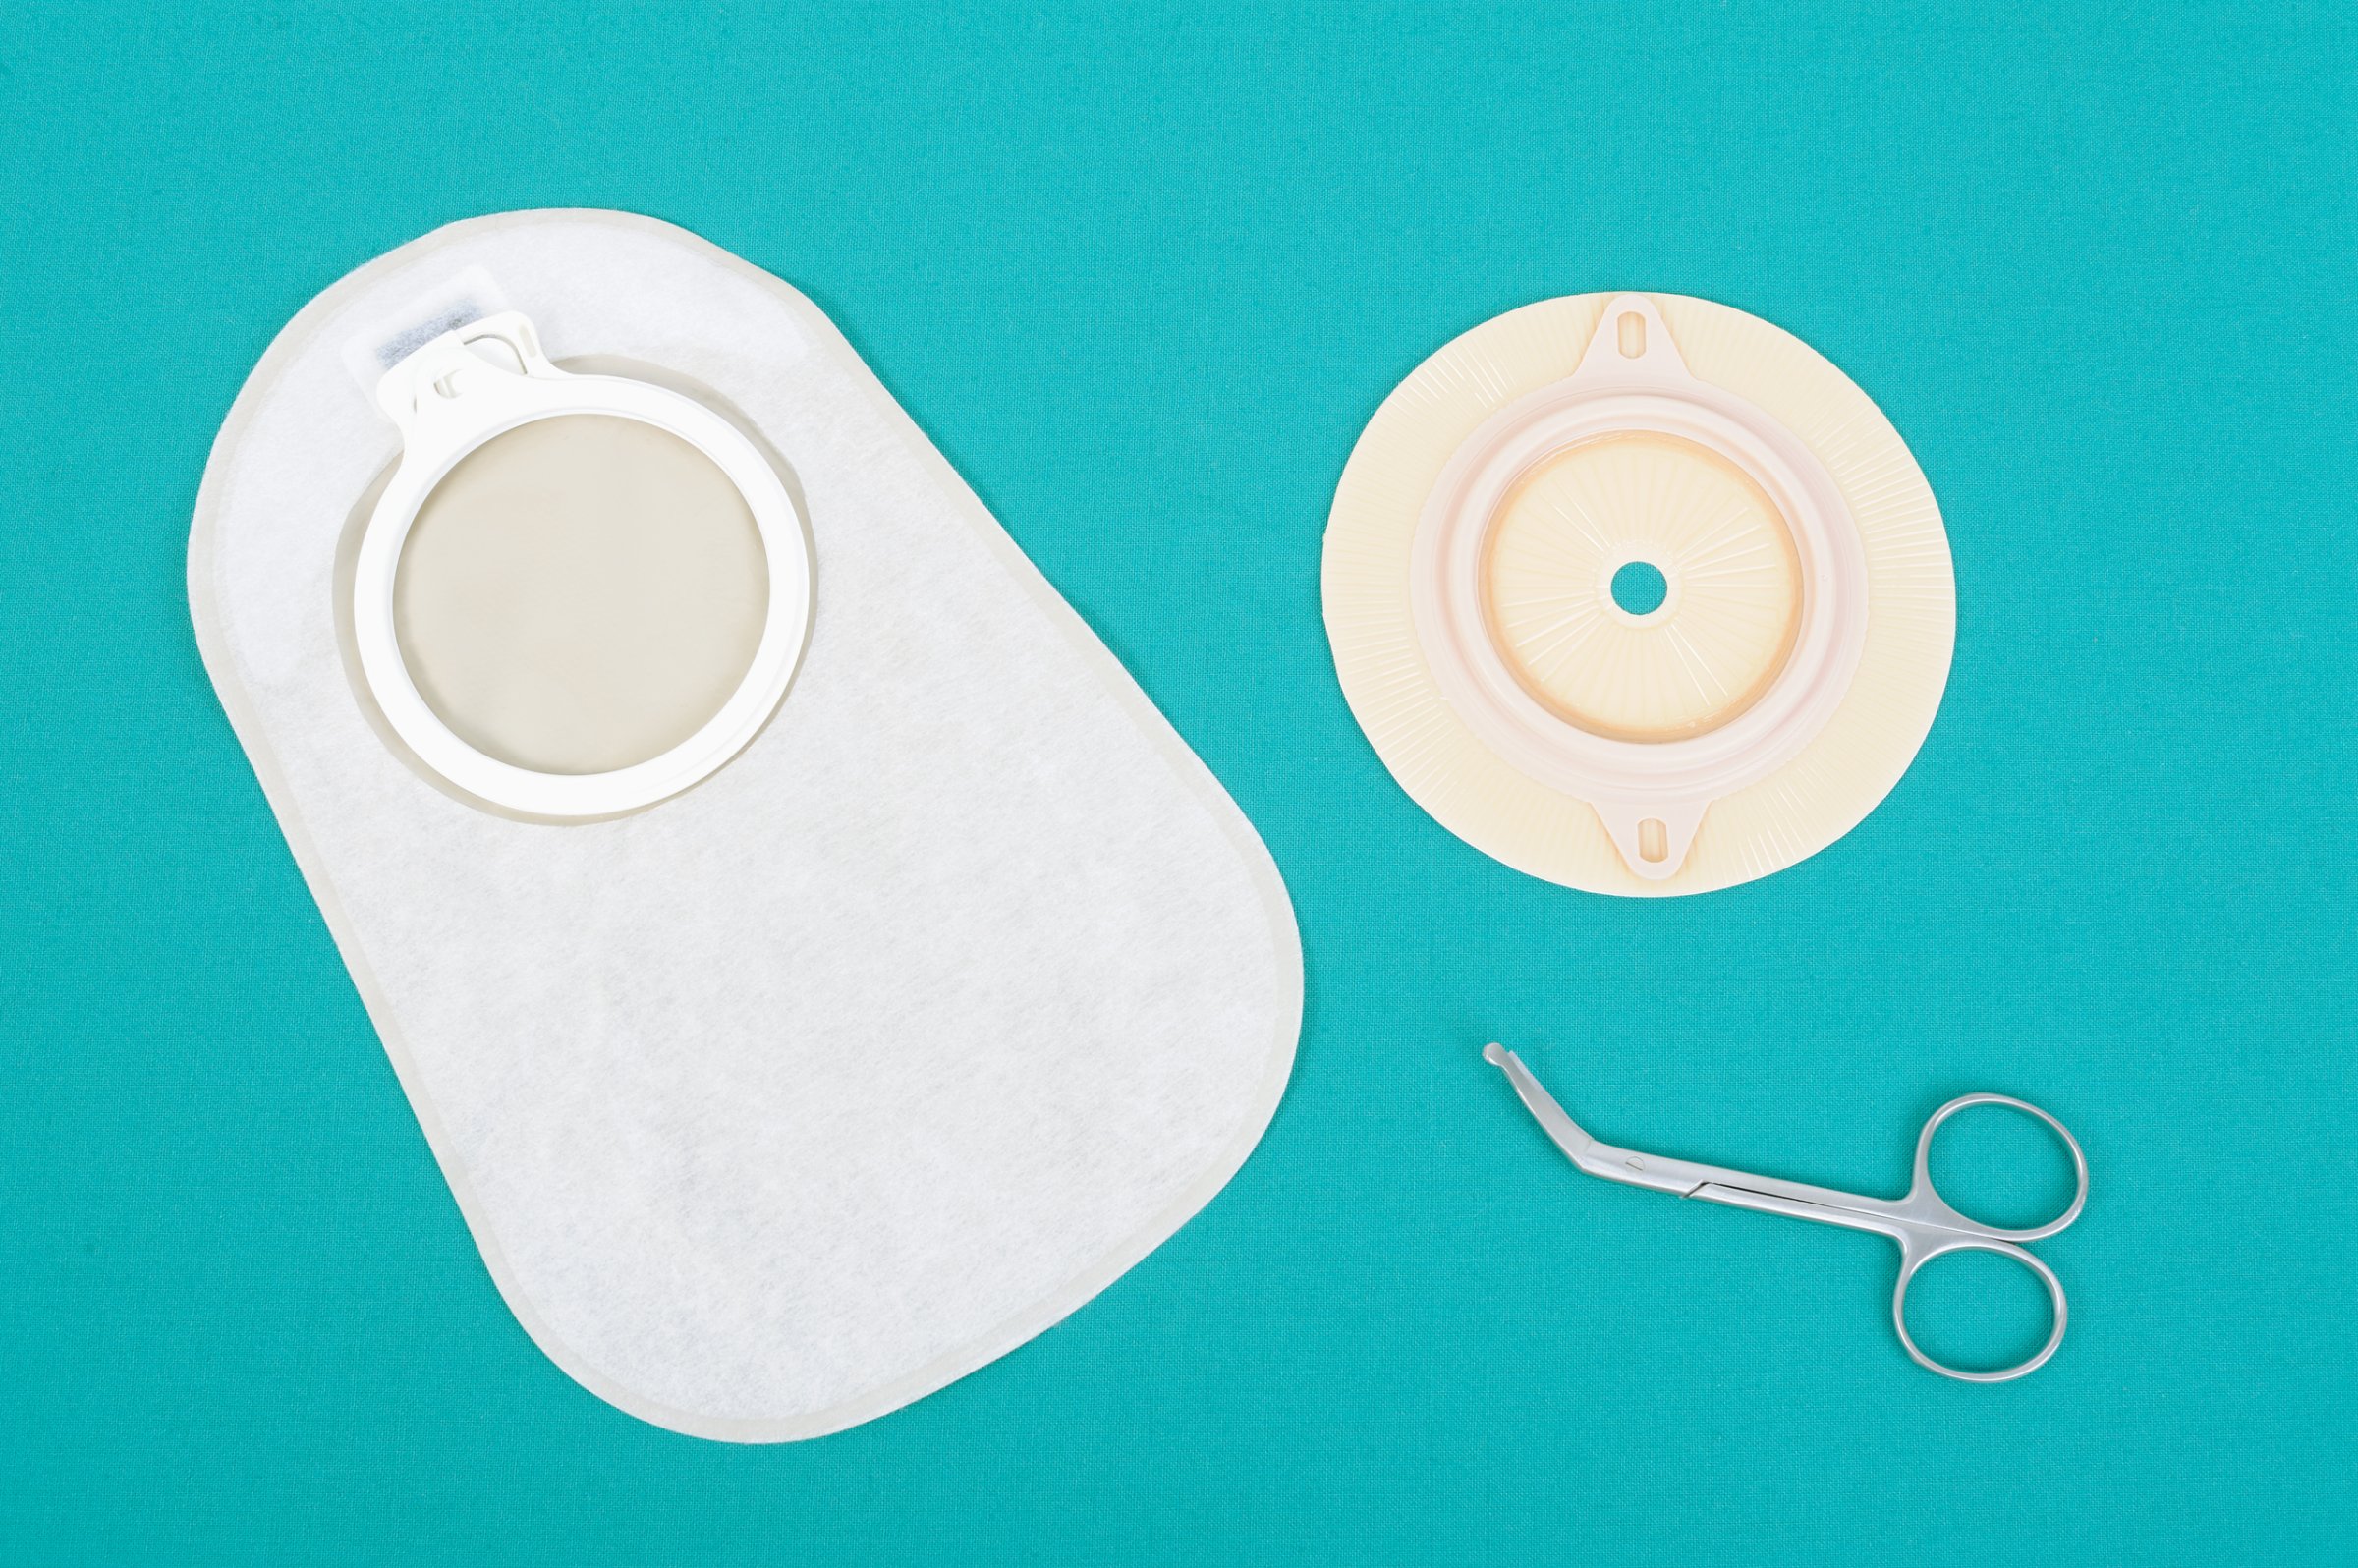 Ostomy supplies, accessory bag and disk with scissors for colostomy